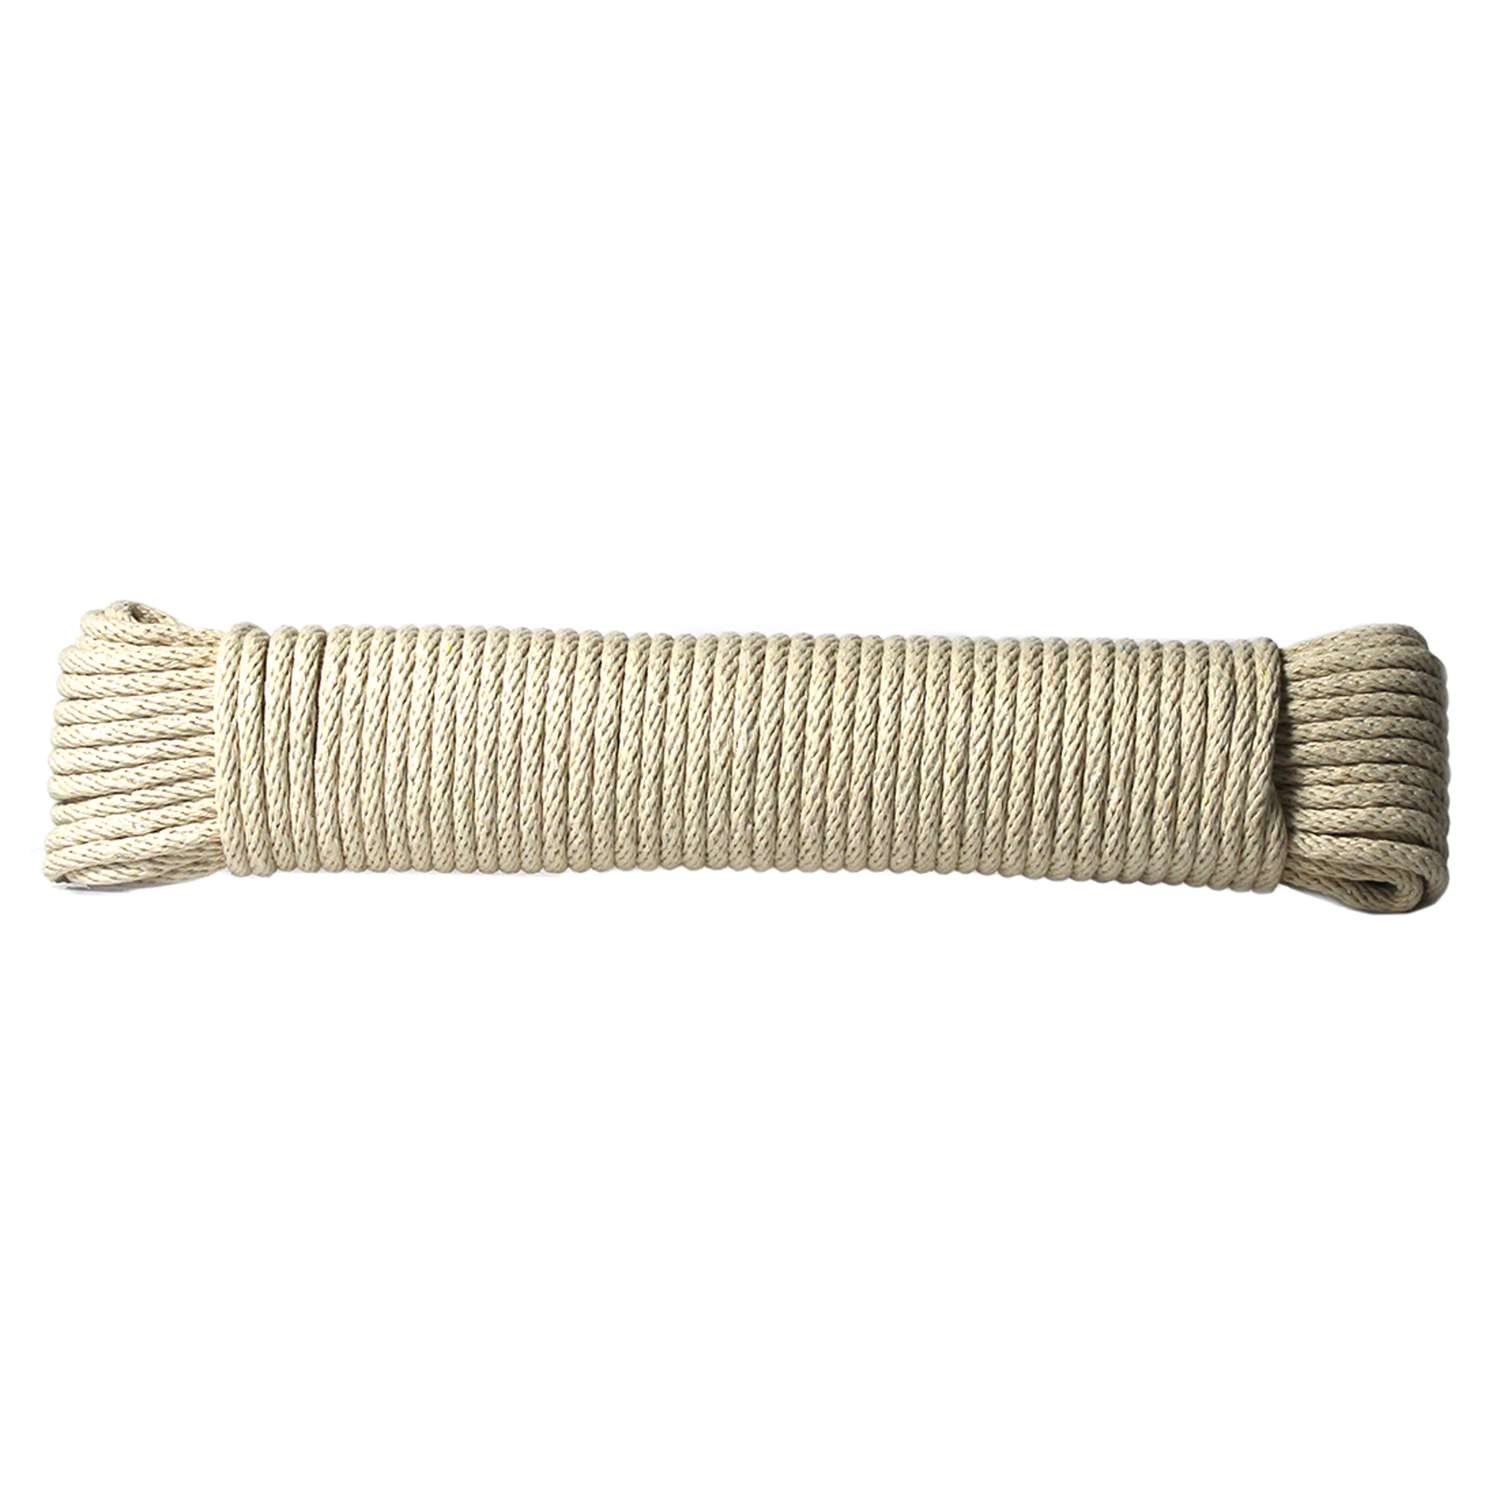 Ace 1/4 in x 100 ft White Solid Braided Cotton Cord